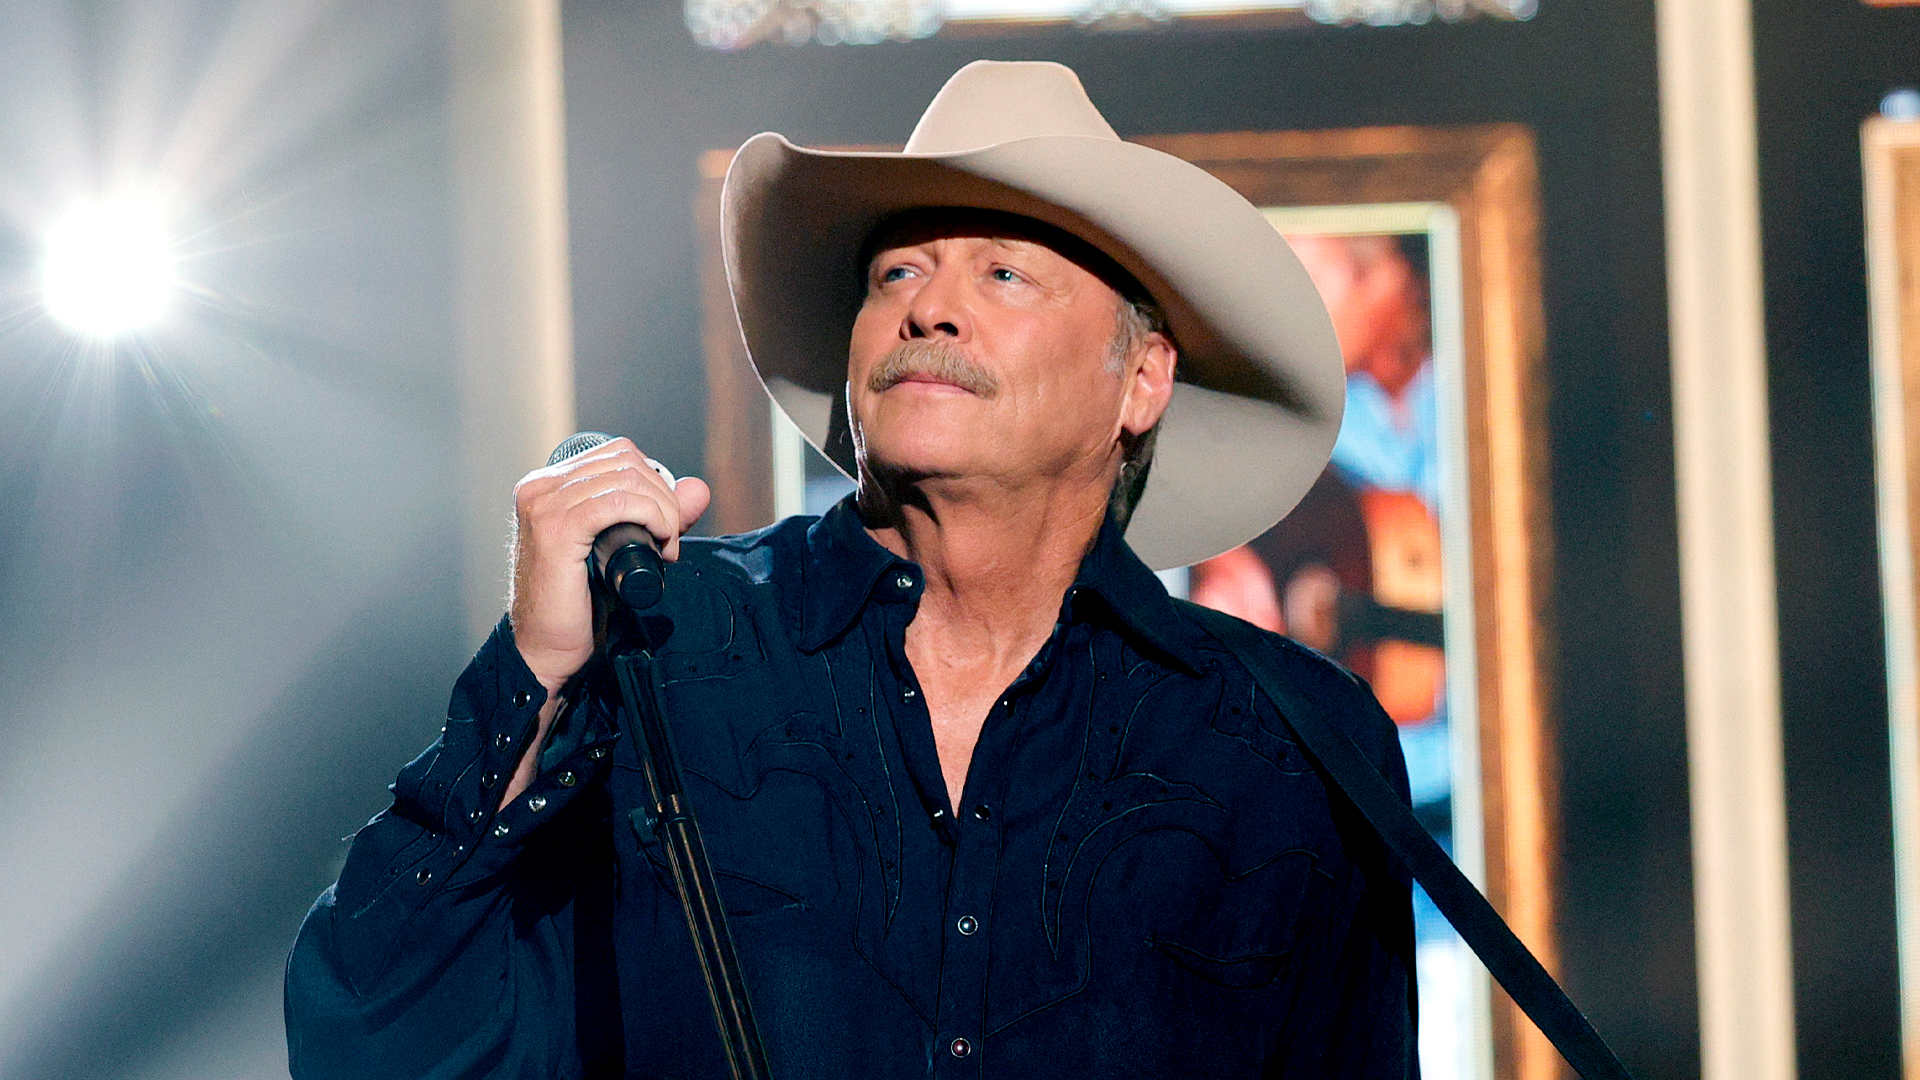 delroy king share who did alan jackson cheat with photos